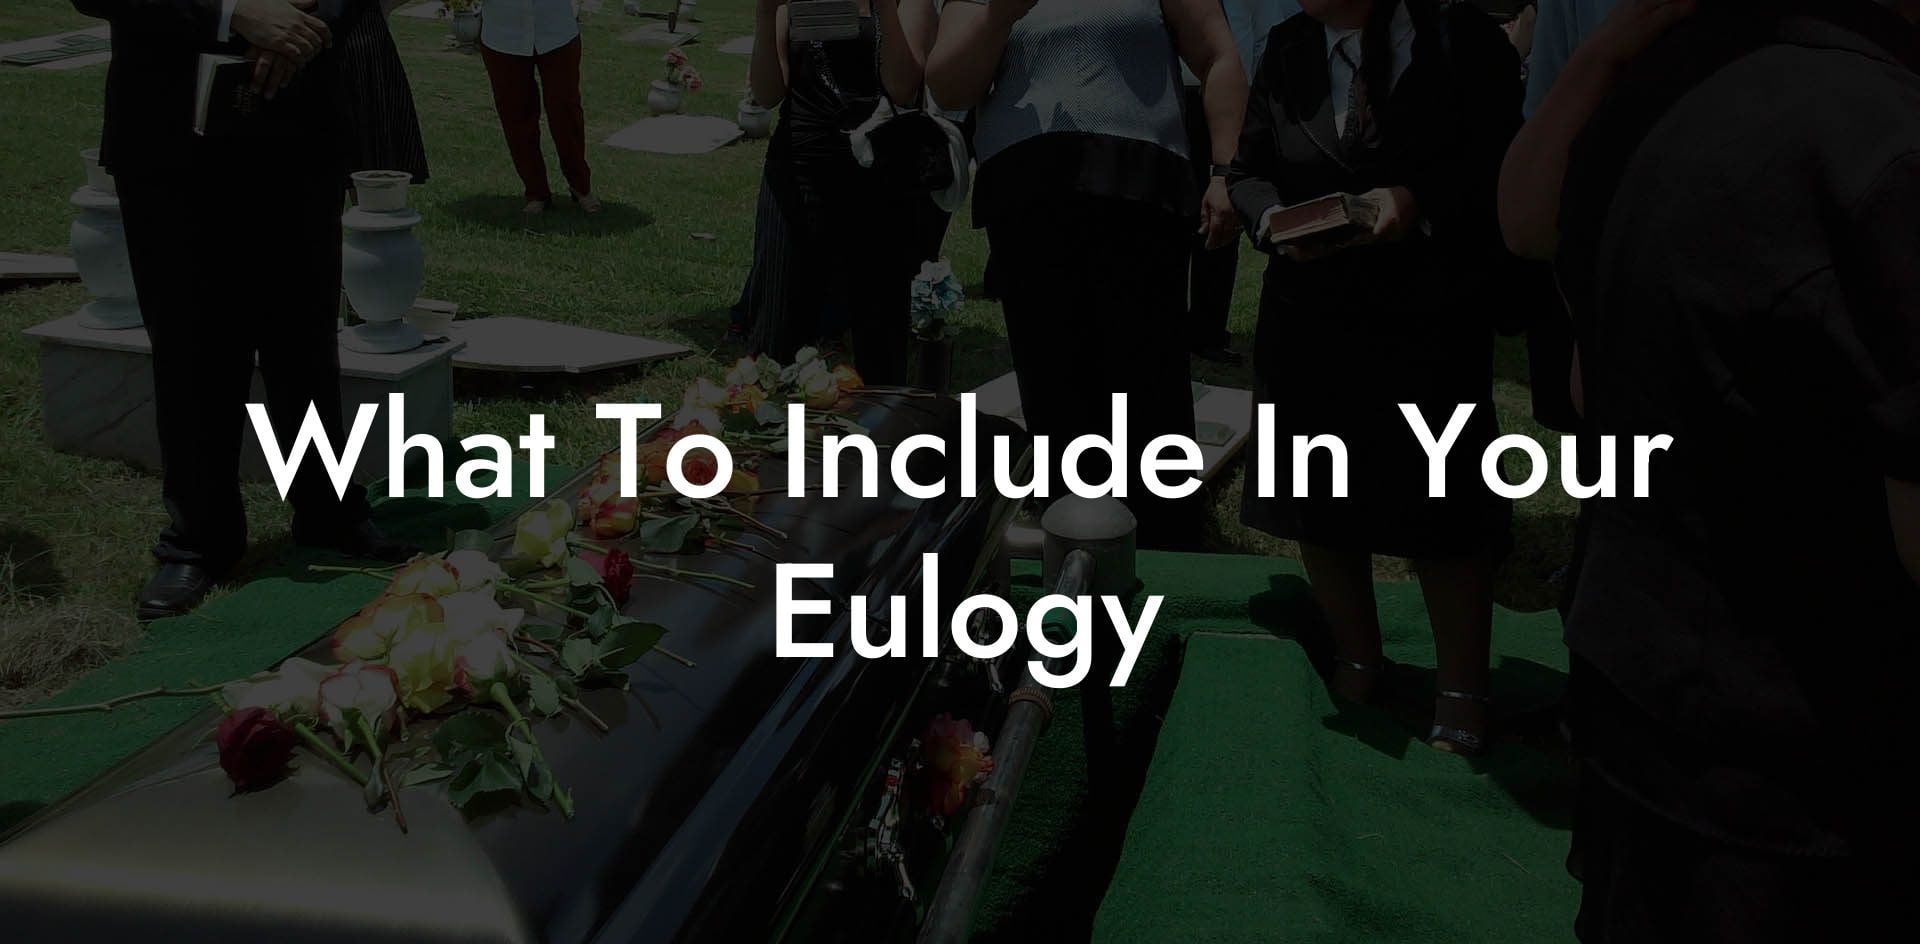 What To Include In Your Eulogy